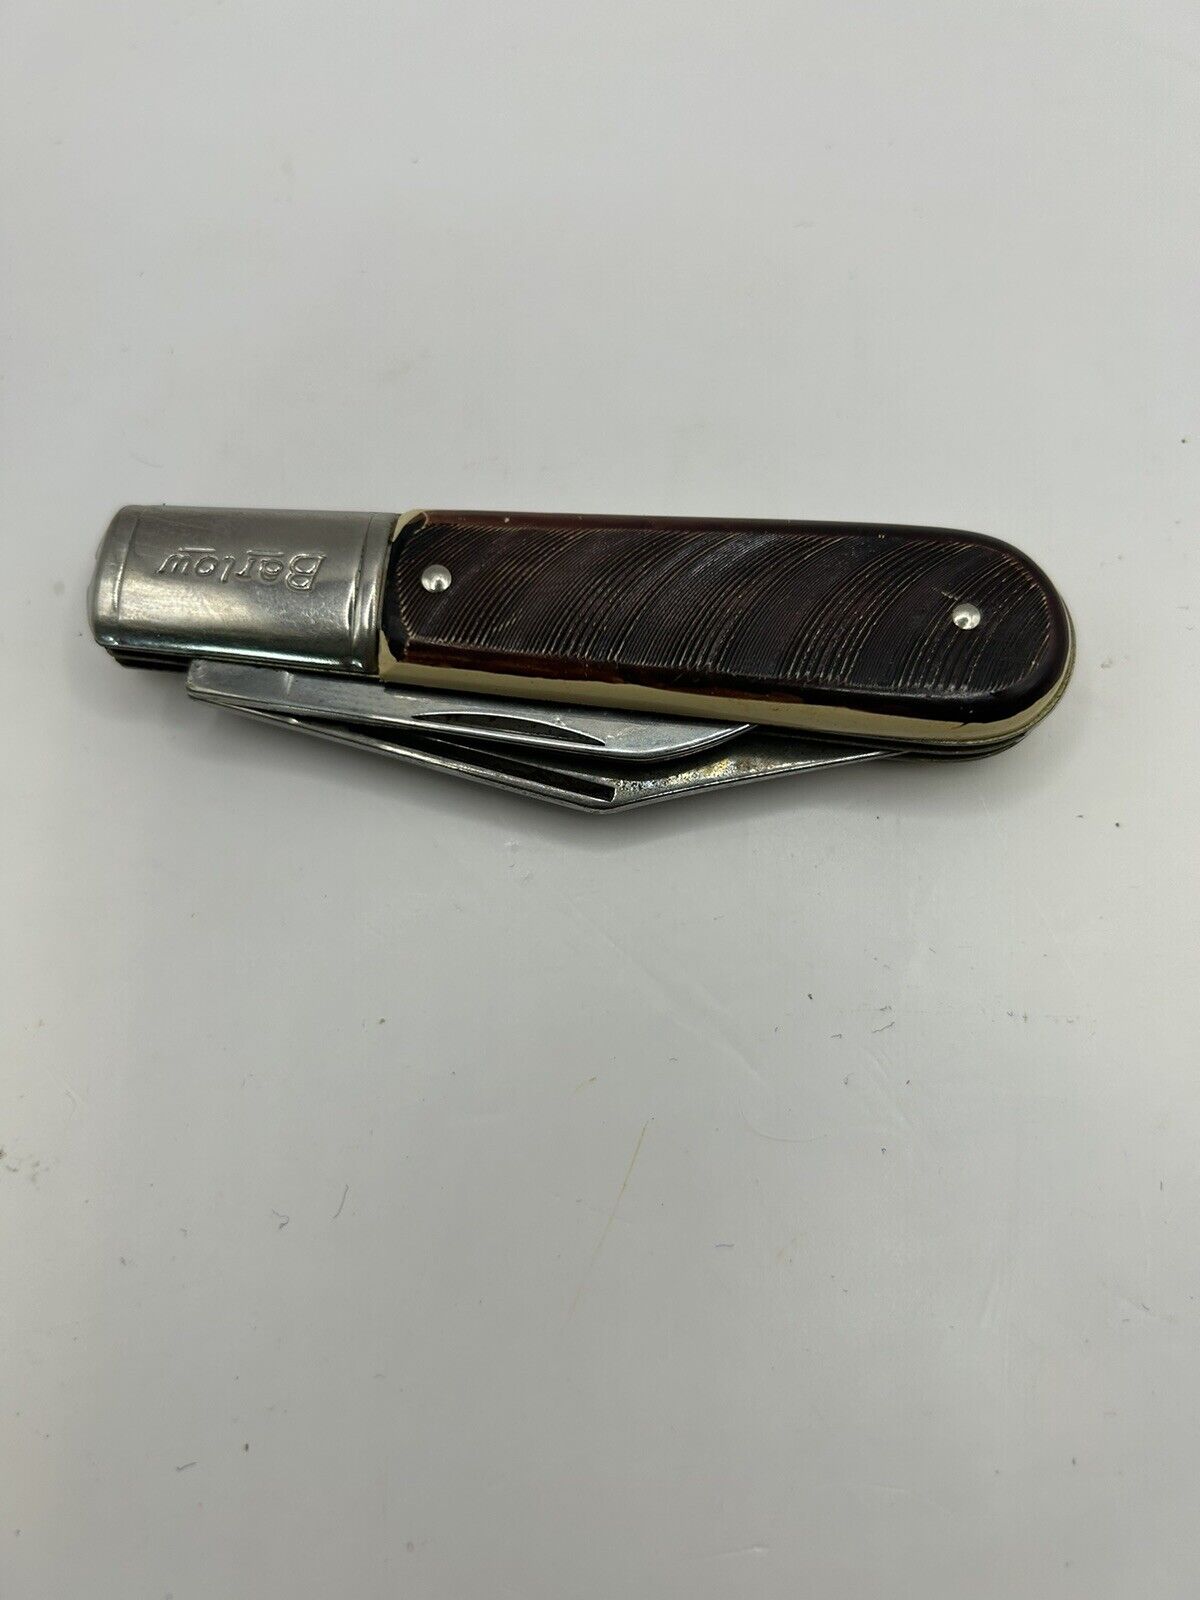 Colonial Barlow Pocket Knife Vintage 2 blades Providence R.I. Made in USA